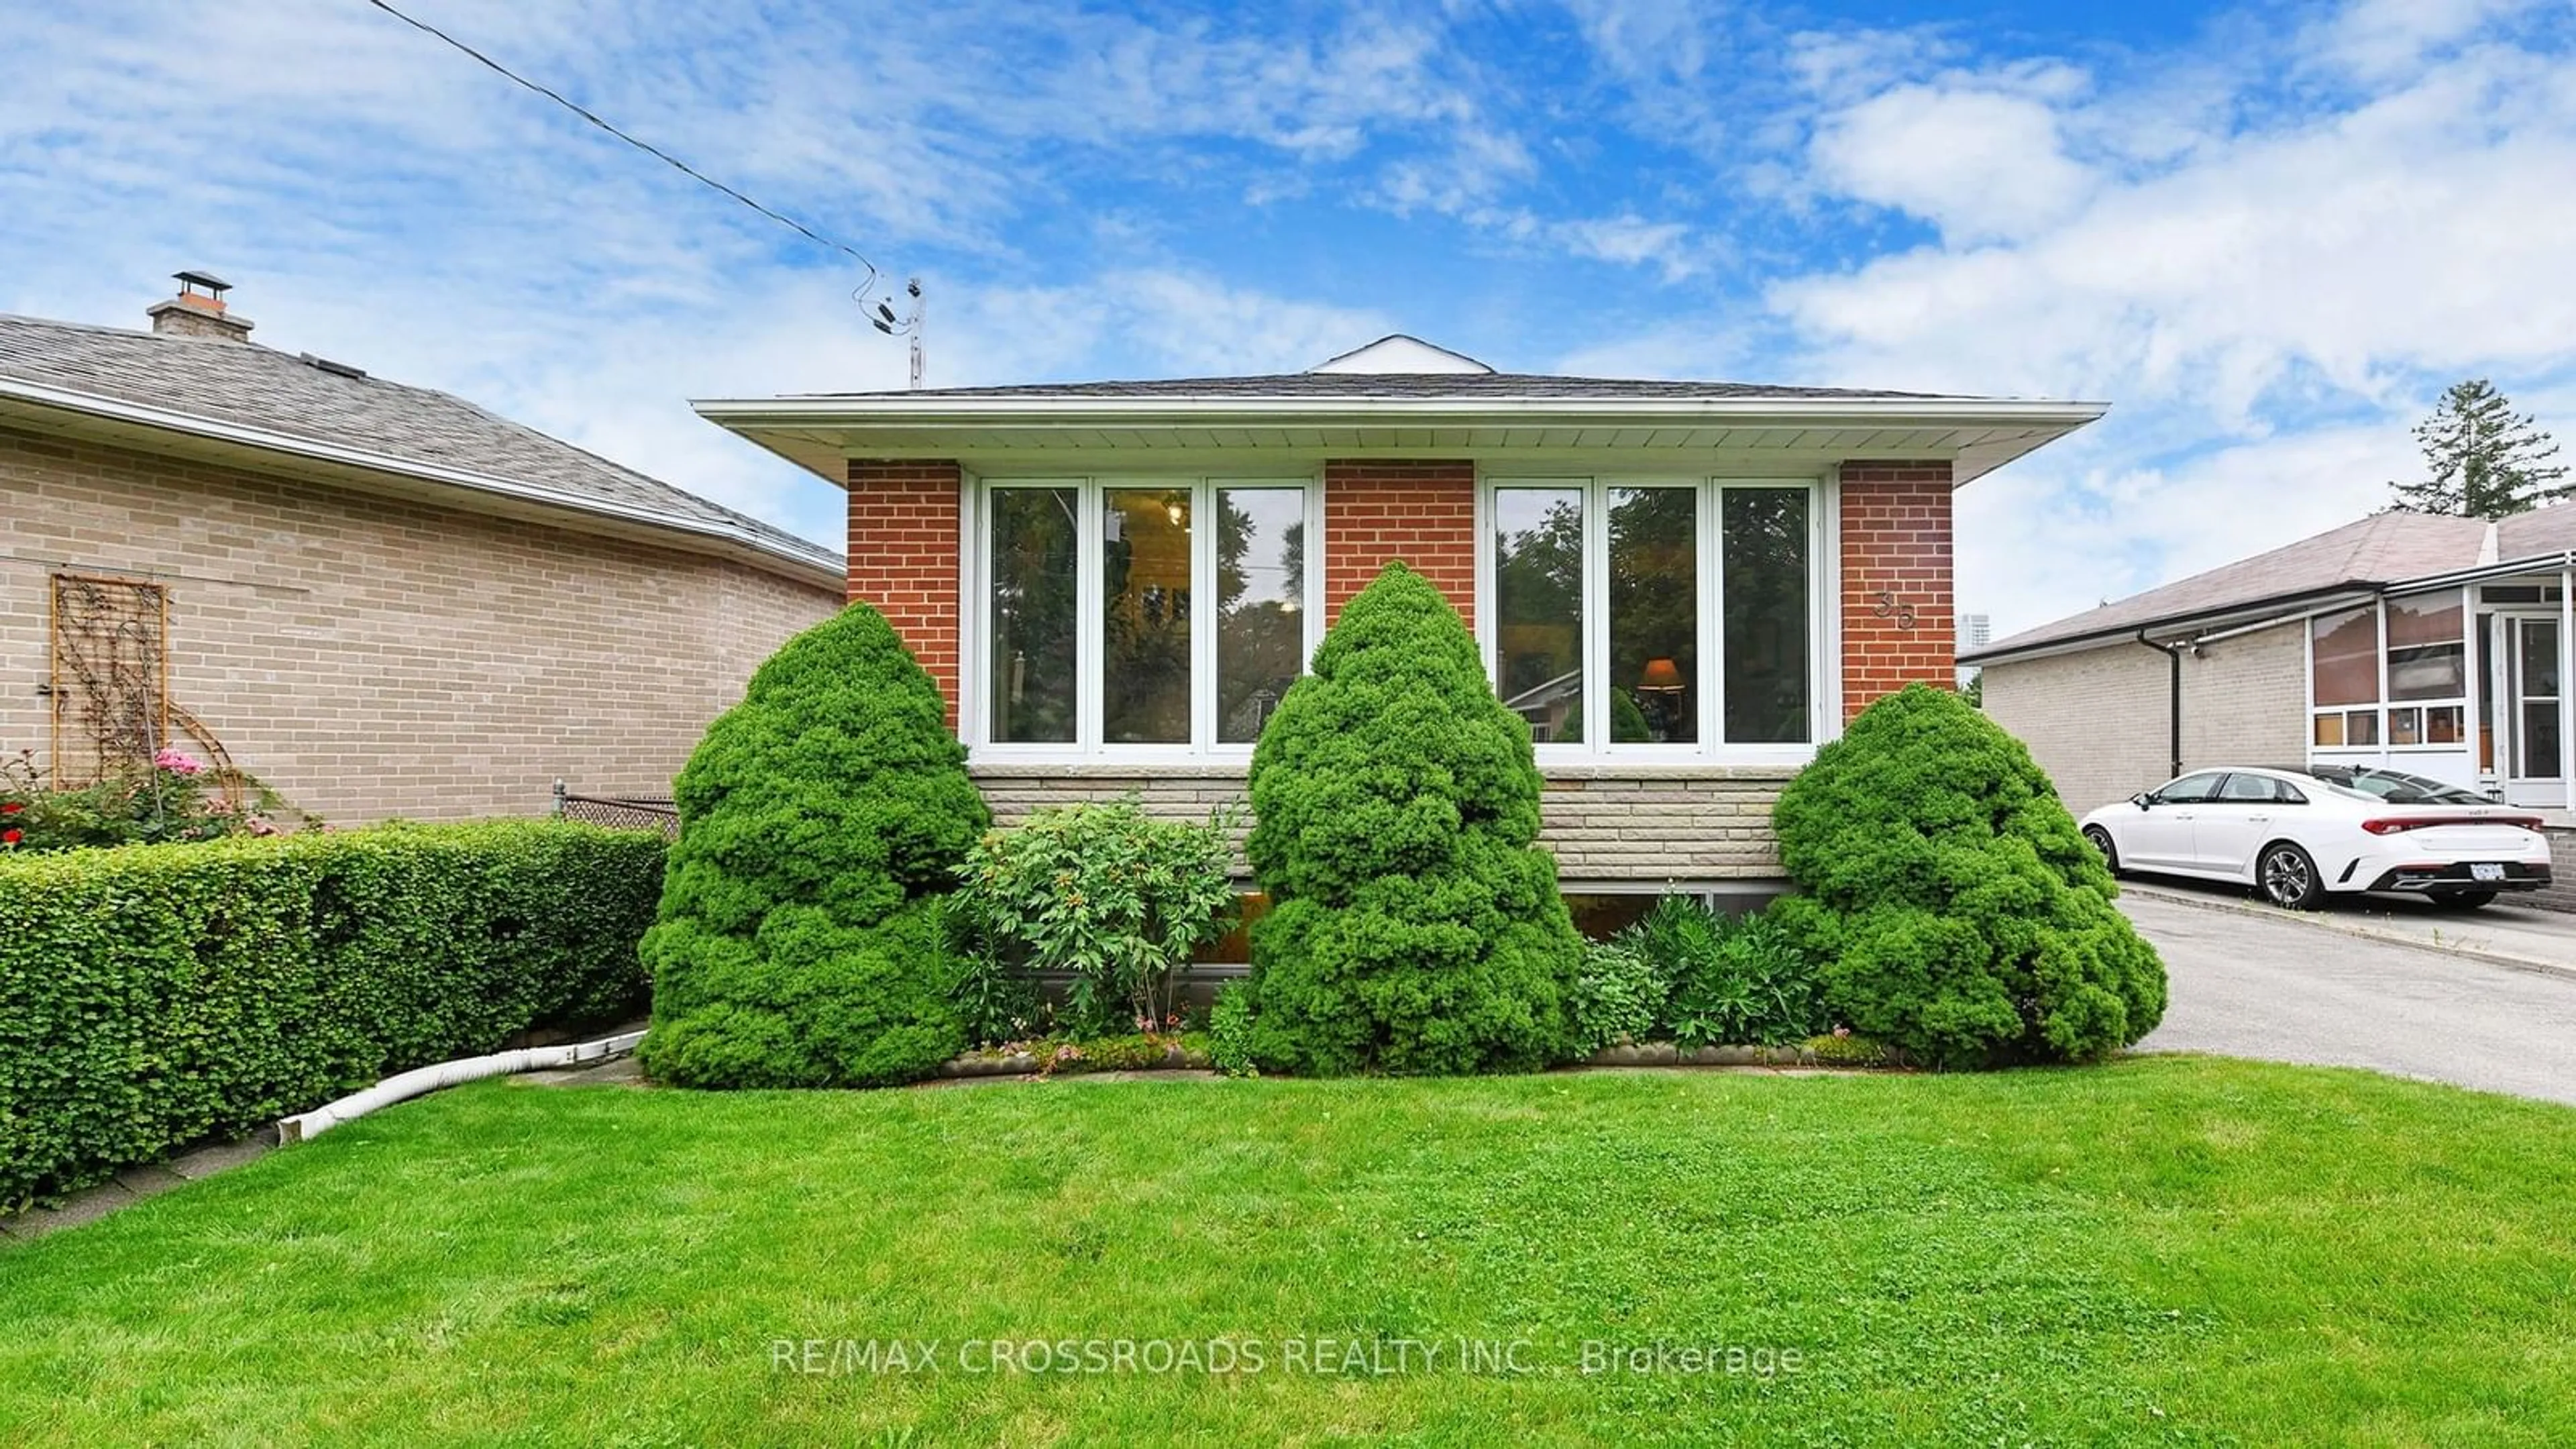 Frontside or backside of a home for 35 Murmouth Rd, Toronto Ontario M1T 2P9